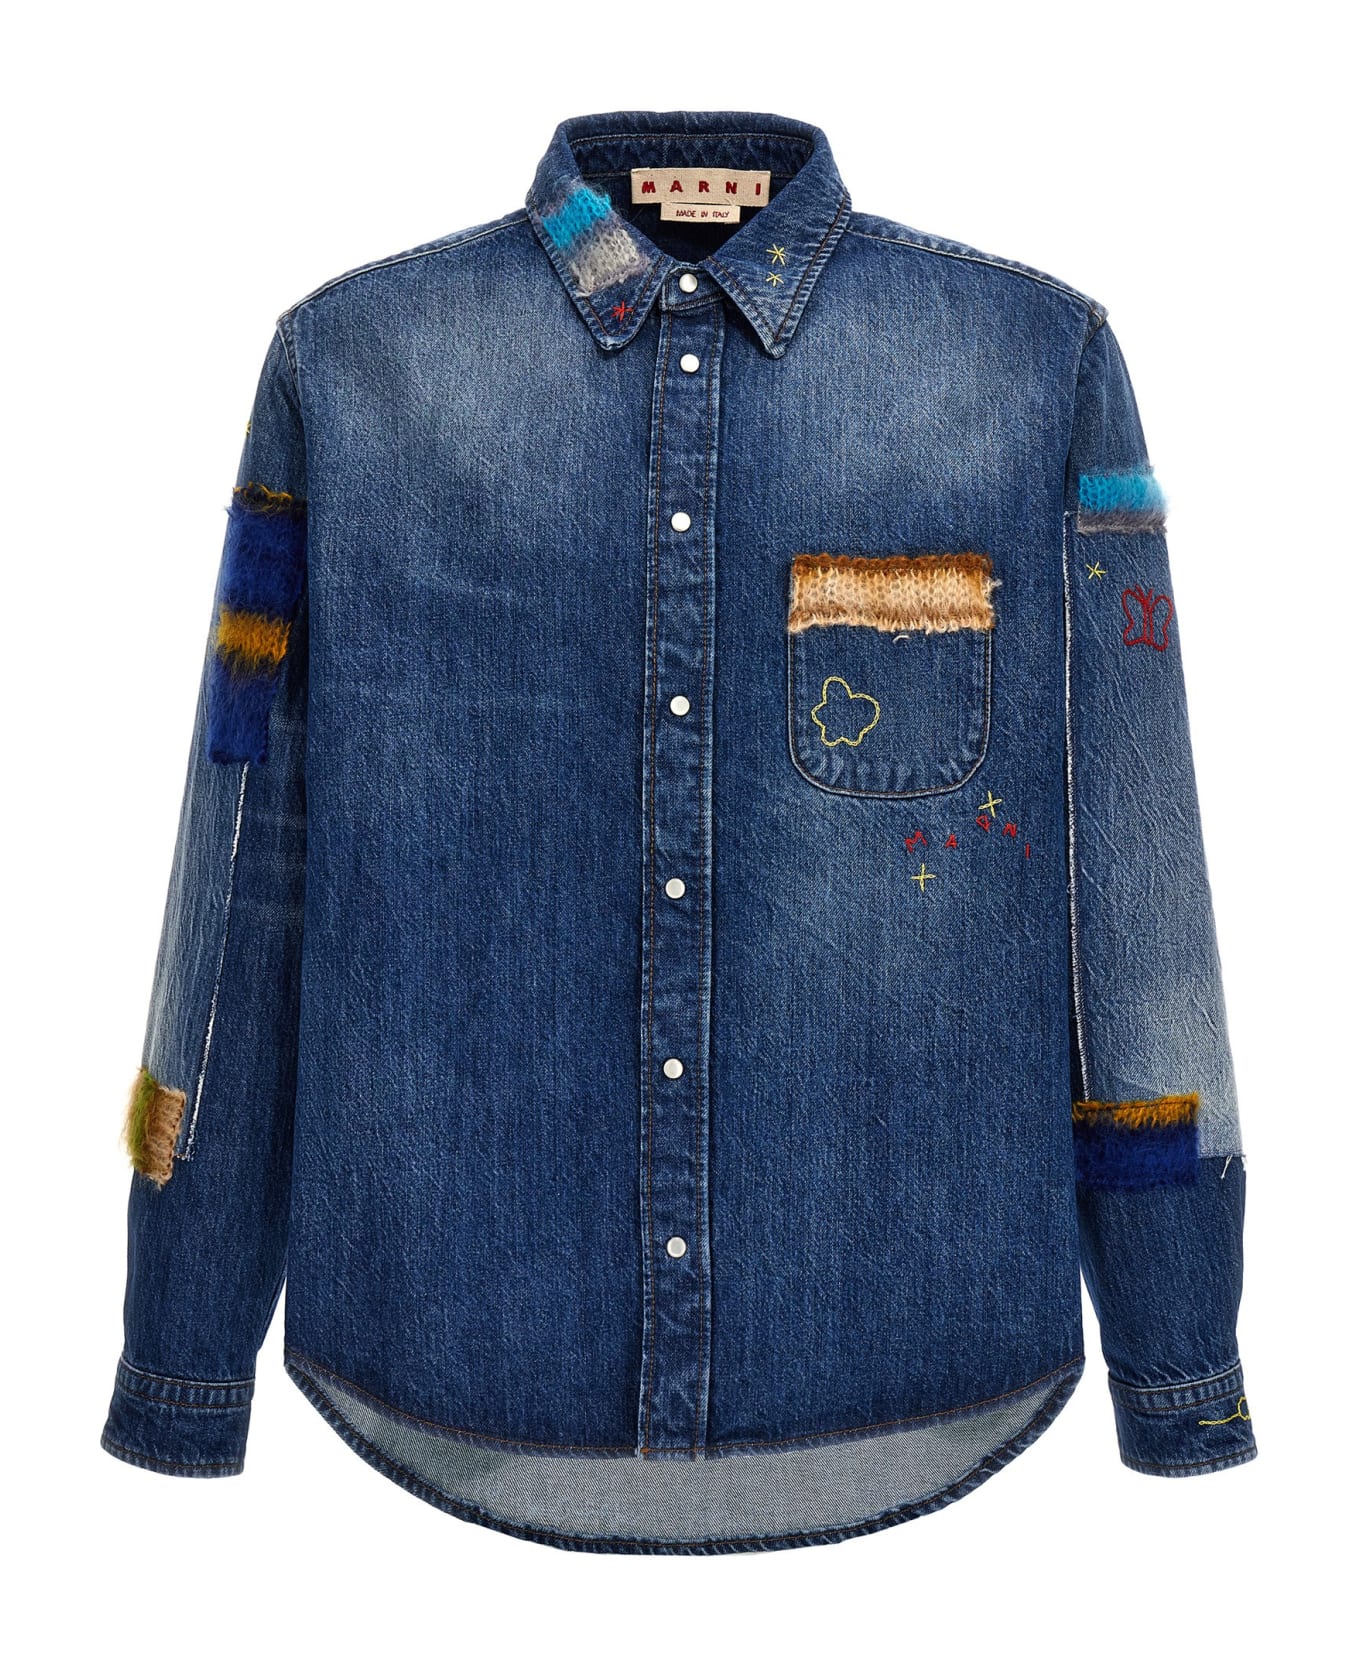 Marni Denim Shirt, Embroidery And Patches - Blu